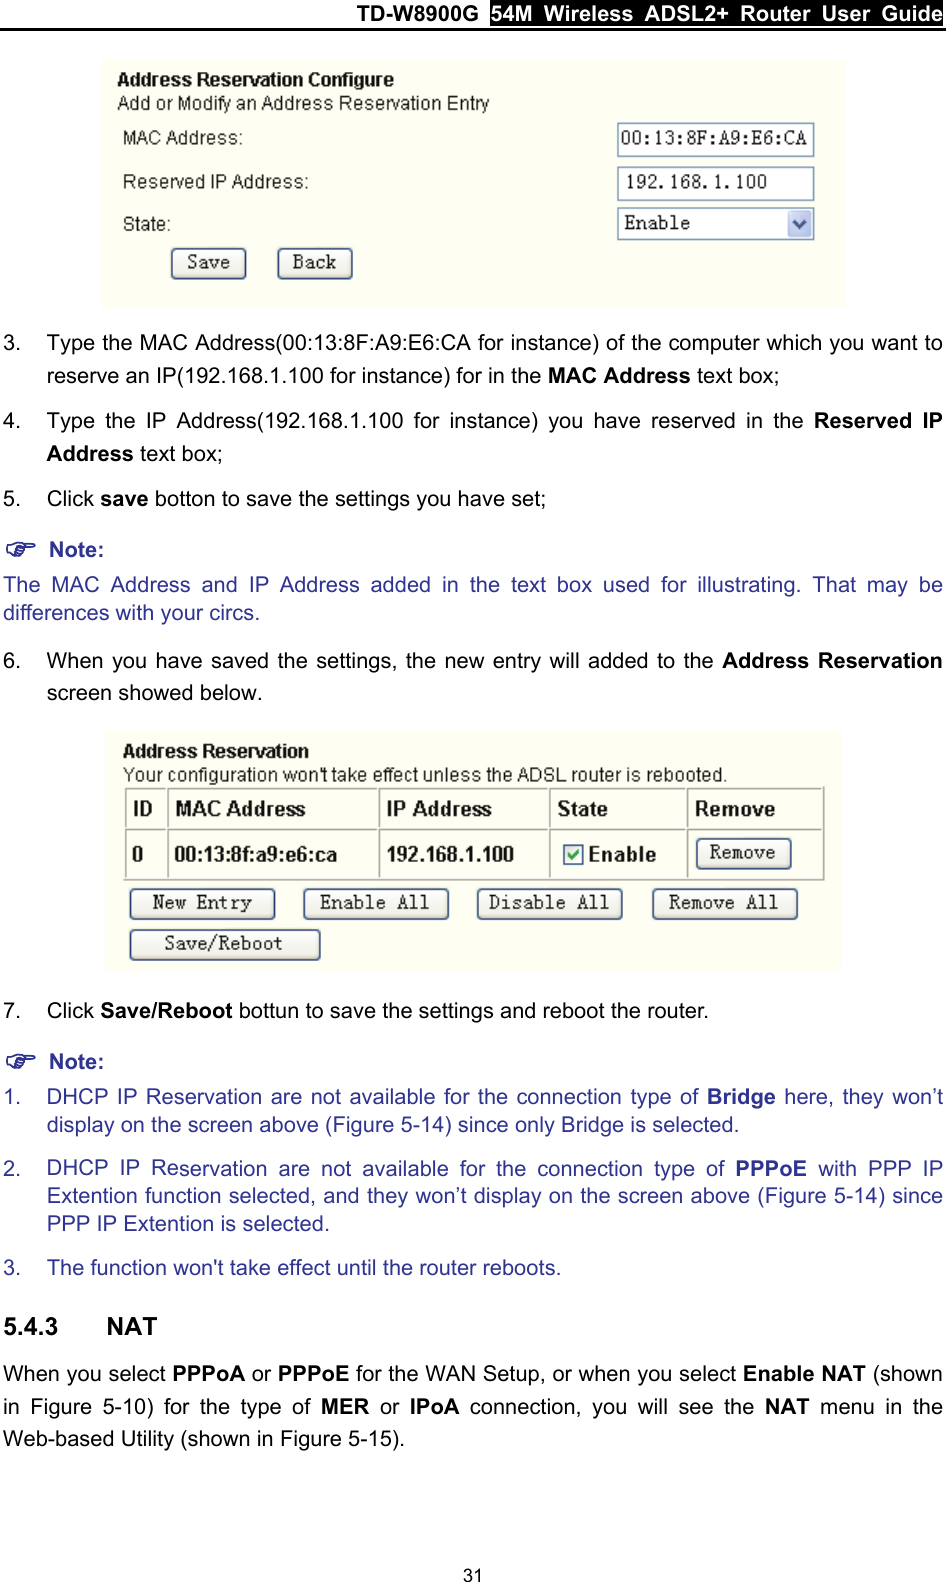 TD-W8900G  54M Wireless ADSL2+ Router User Guide 31  3.  Type the MAC Address(00:13:8F:A9:E6:CA for instance) of the computer which you want to reserve an IP(192.168.1.100 for instance) for in the MAC Address text box; 4.  Type the IP Address(192.168.1.100 for instance) you have reserved in the Reserved IP Address text box; 5. Click save botton to save the settings you have set; ) Note: The MAC Address and IP Address added in the text box used for illustrating. That may be differences with your circs. 6.  When you have saved the settings, the new entry will added to the Address Reservation screen showed below.  7. Click Save/Reboot bottun to save the settings and reboot the router. ) Note: 1.  DHCP IP Reservation are not available for the connection type of Bridge here, they won’t display on the screen above (Figure 5-14) since only Bridge is selected. 2.  DHCP IP Reservation are not available for the connection type of PPPoE  with PPP IP Extention function selected, and they won’t display on the screen above (Figure 5-14) since PPP IP Extention is selected. 3.  The function won&apos;t take effect until the router reboots. 5.4.3  NAT When you select PPPoA or PPPoE for the WAN Setup, or when you select Enable NAT (shown in  Figure 5-10) for the type of MER or IPoA connection, you will see the NAT menu in the Web-based Utility (shown in Figure 5-15). 